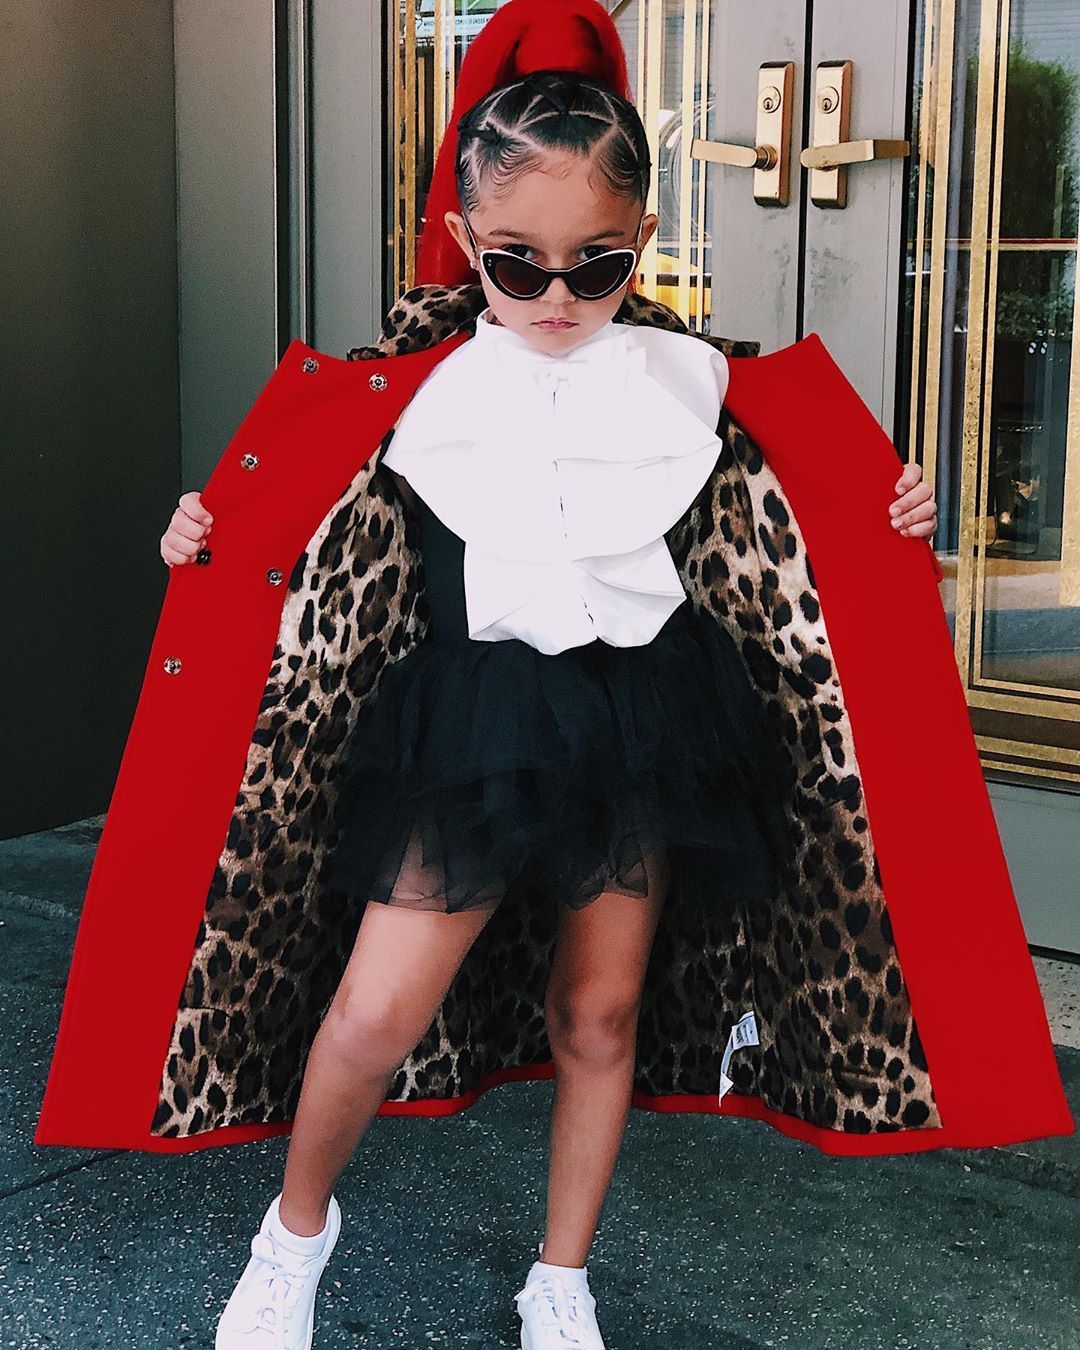 Meet the 10-year-old fashion influencer